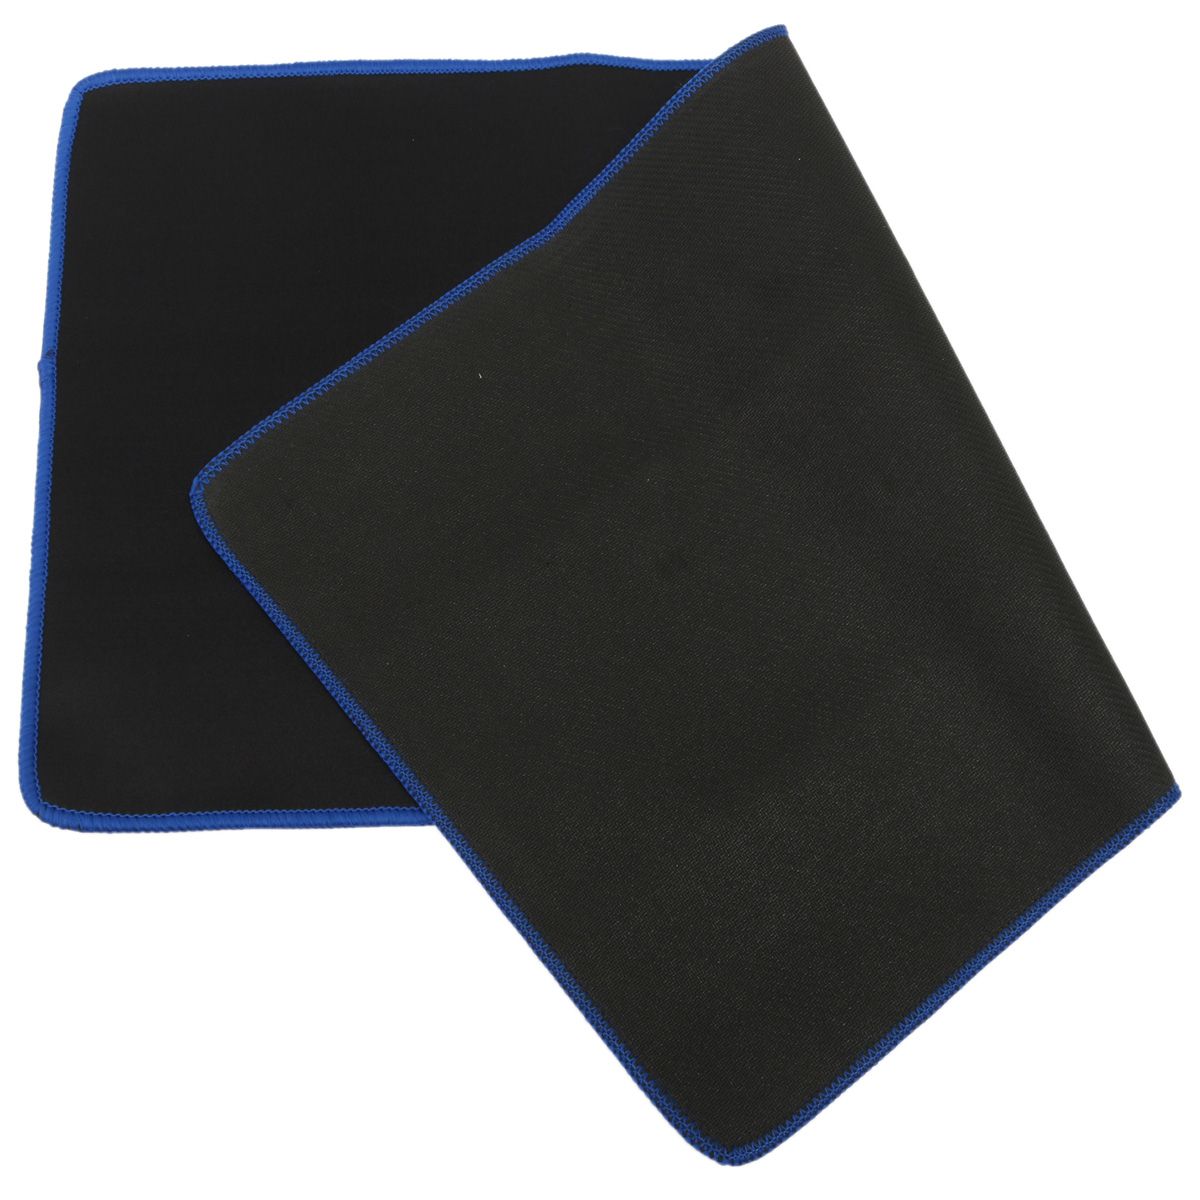 300x700x2mm-Ultra-Large-Thickening-Mouse-Desk-Keyboard-Pad-Table-Mat-1012177